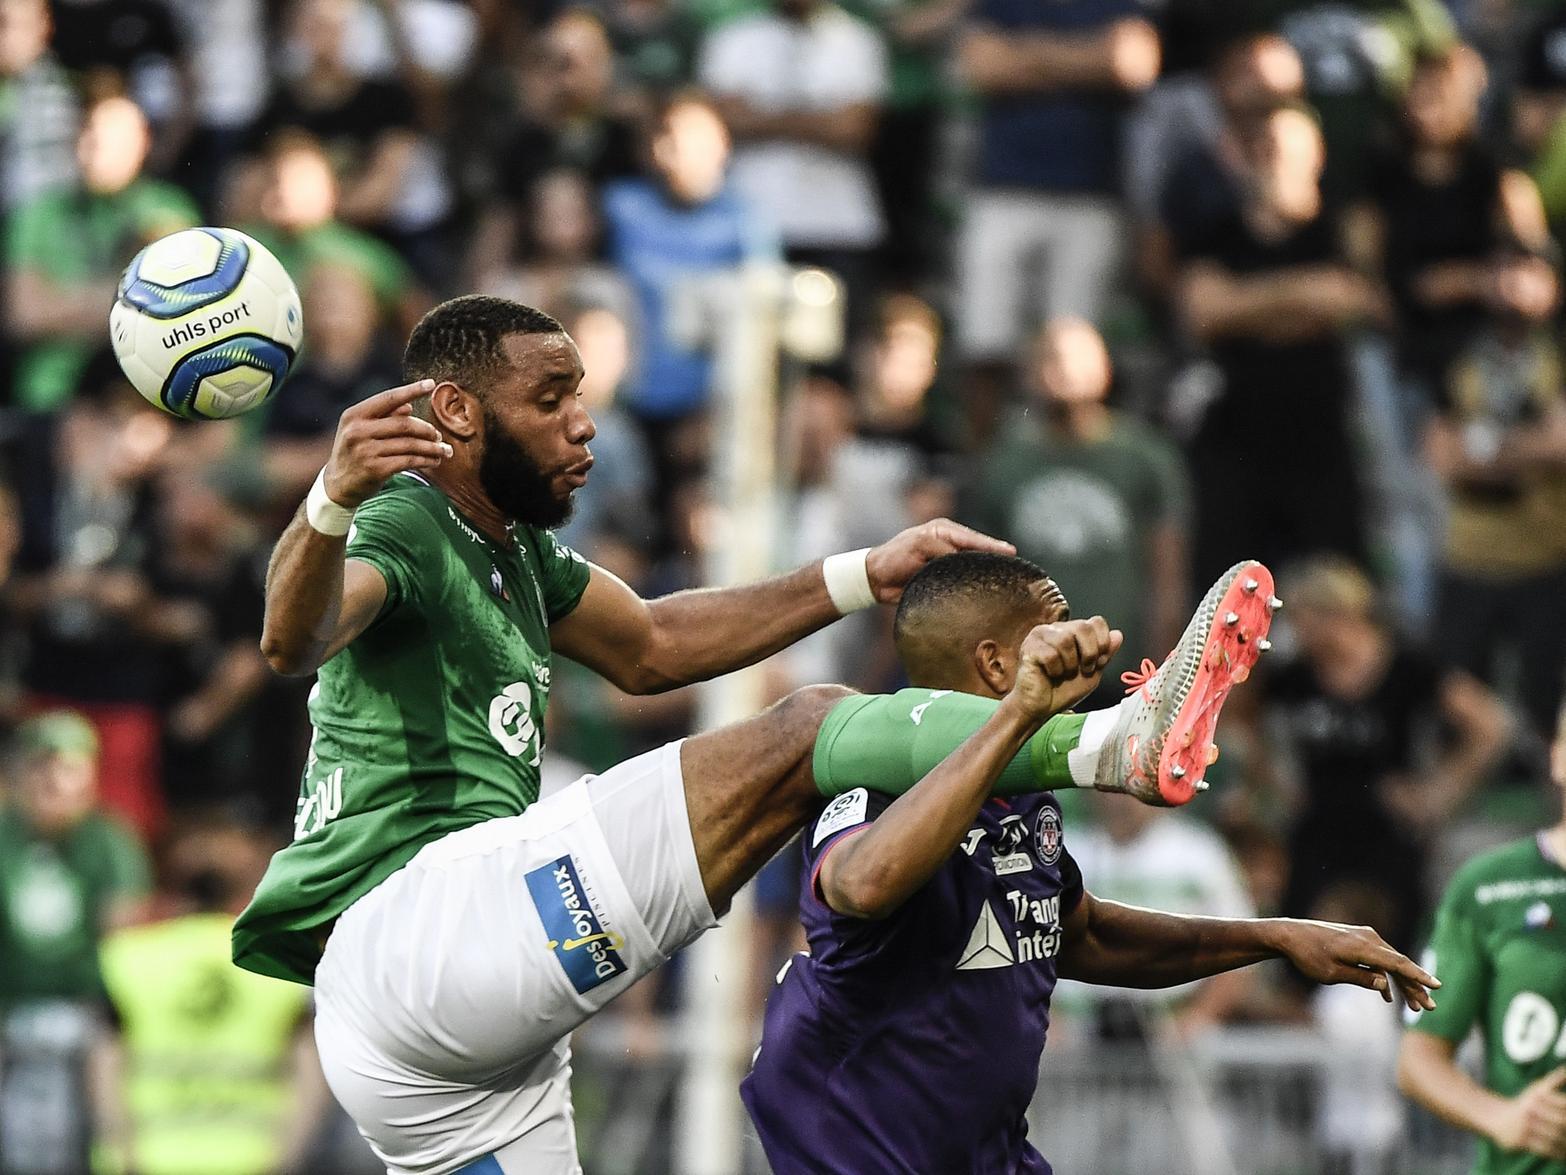 Leeds United are rumoured to have joined the race to sign Cameroon international defenderHarold Moukoudi, who has been on fire for Ligue 1 outfit St Etienne this season. (L'Equipe)